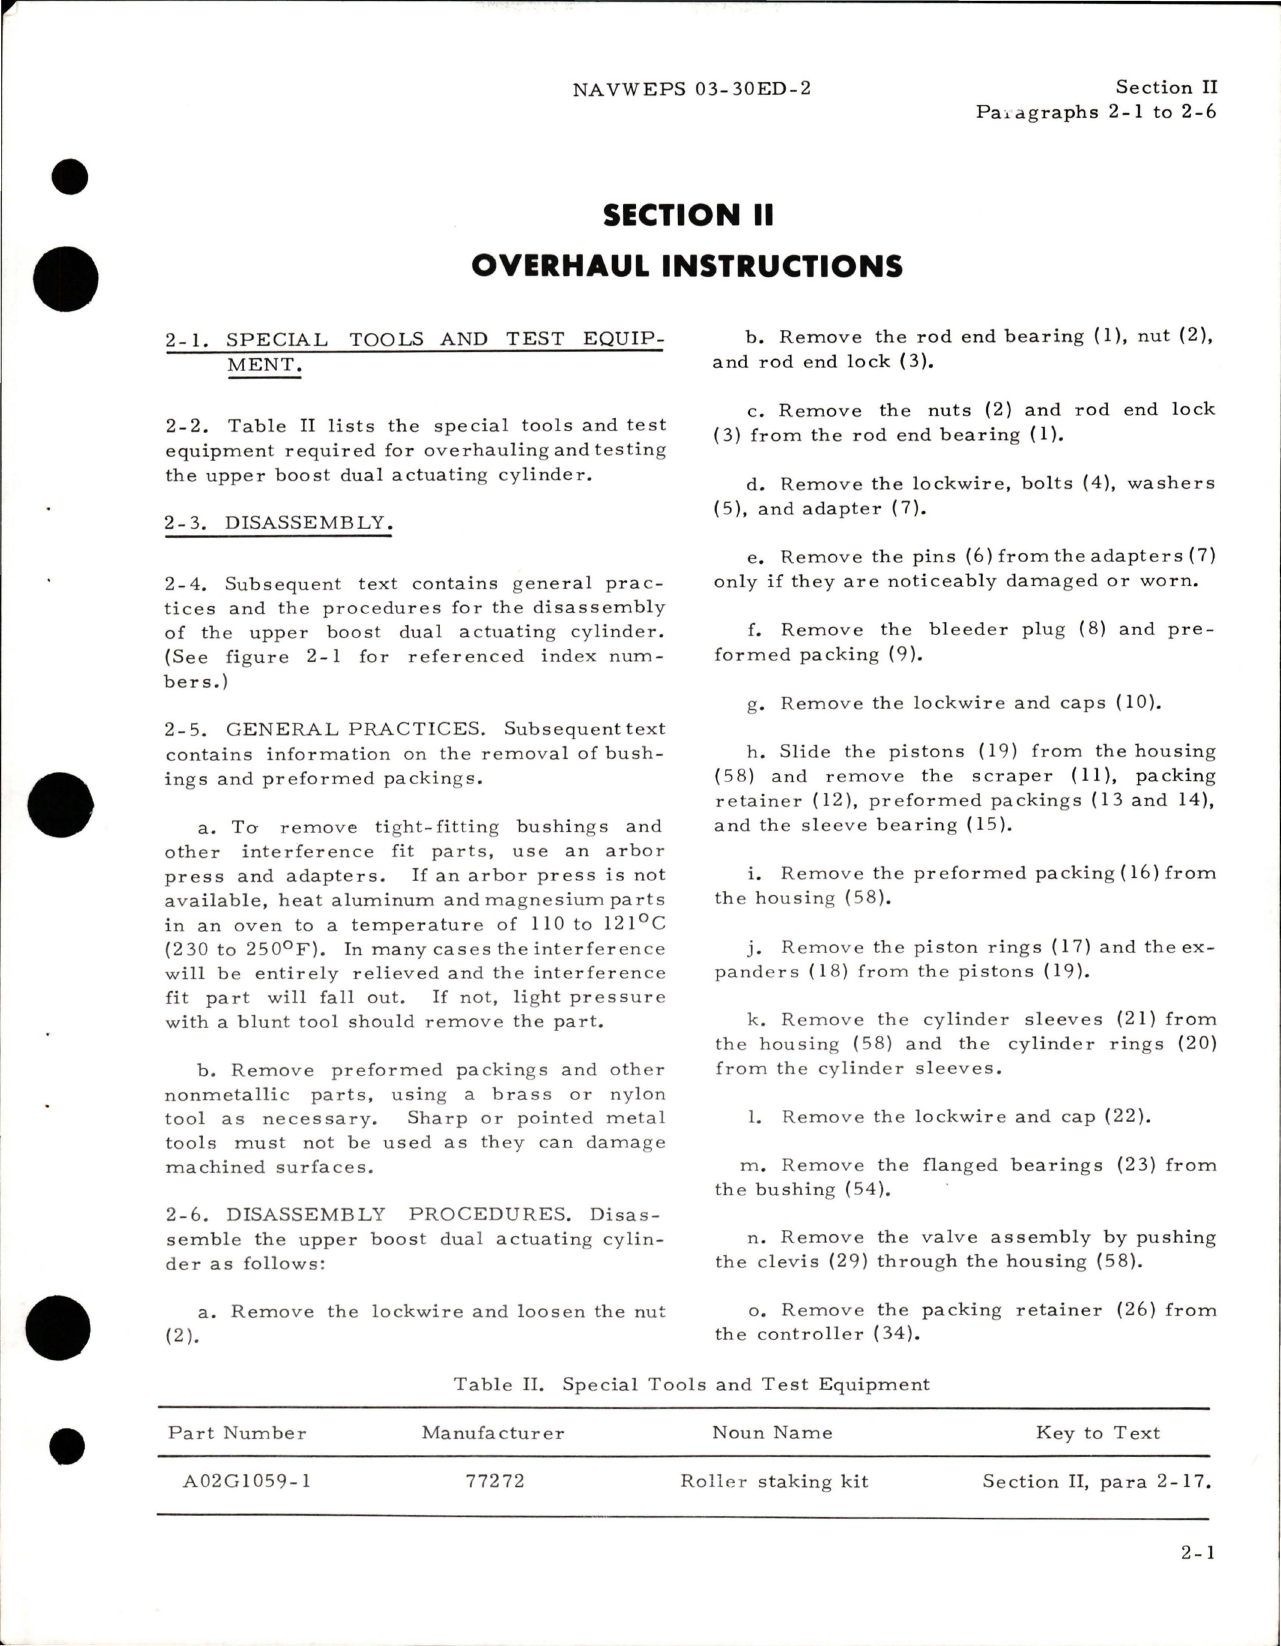 Sample page 7 from AirCorps Library document: Overhaul Instructions for Upper Boost Dual Actuating Cylinder - Part A02H4800-5 and A02H4800-6 